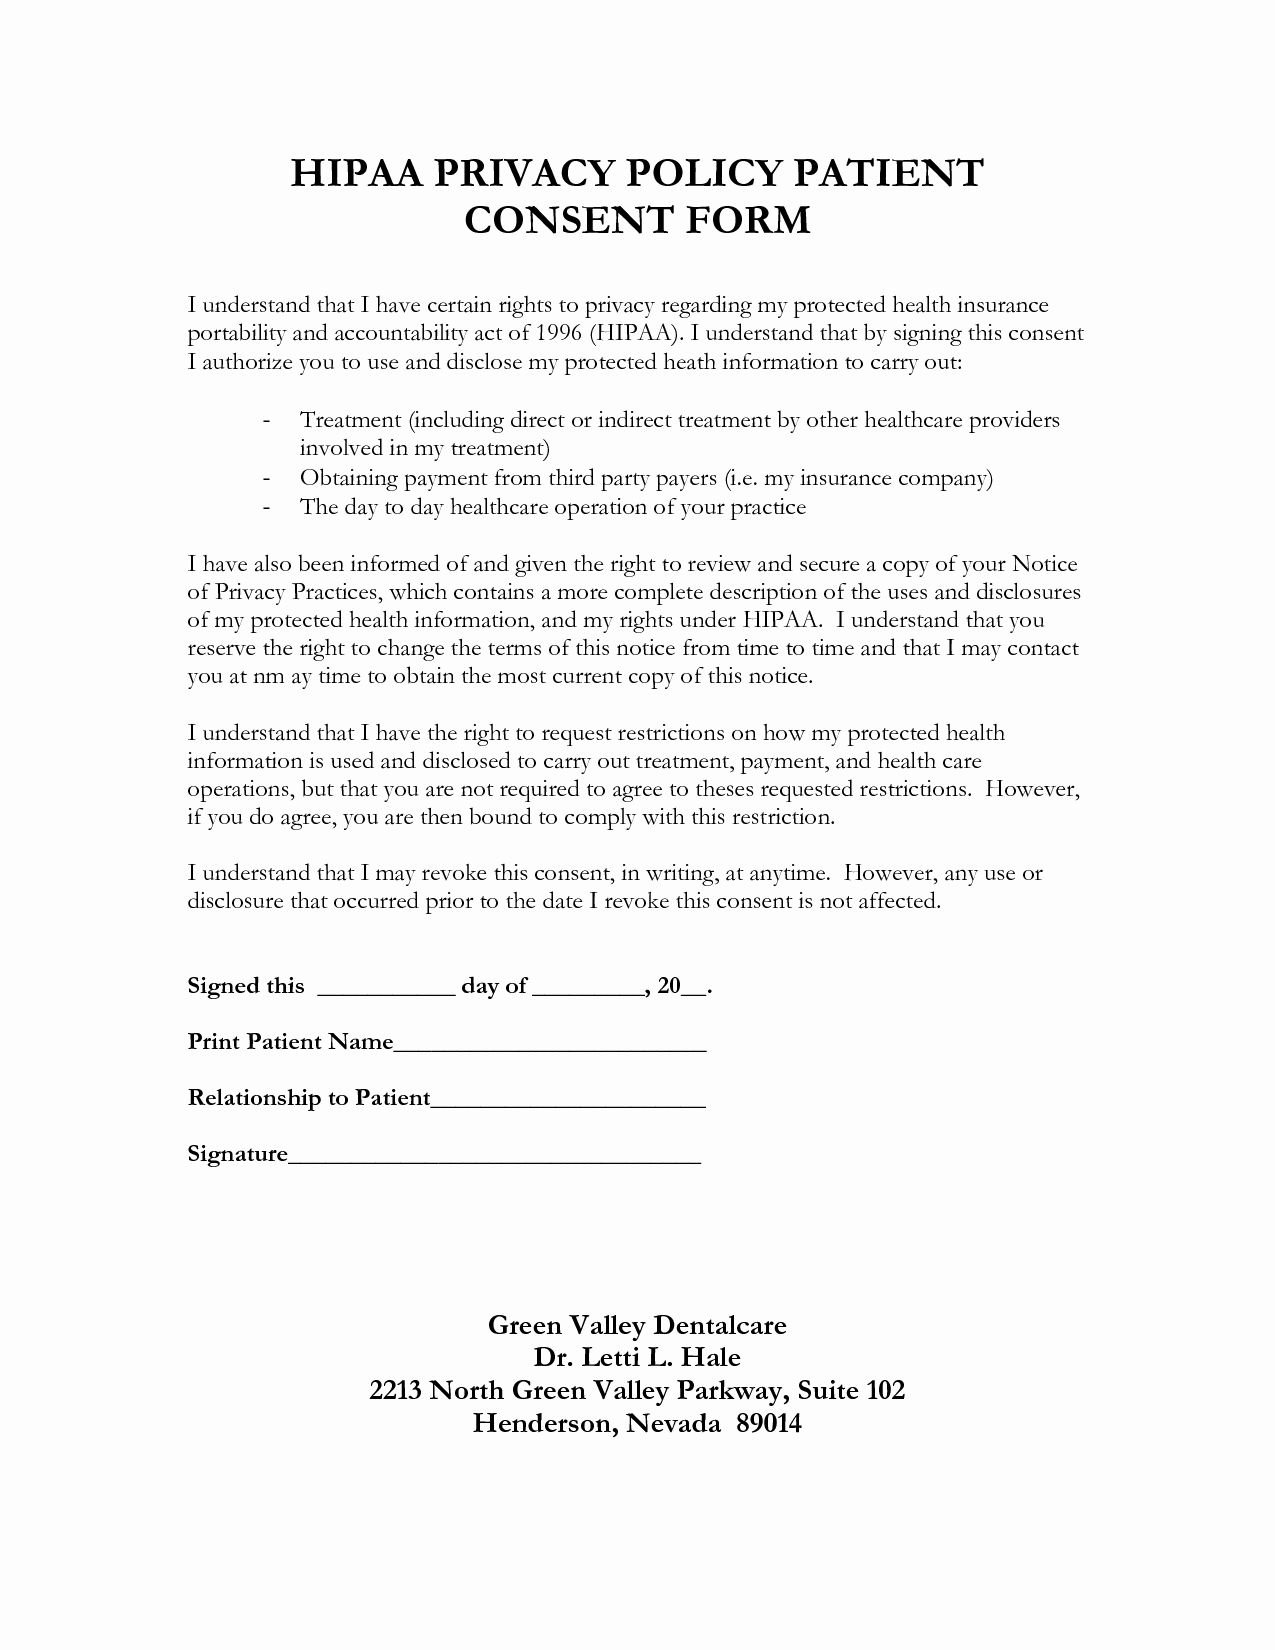 Notice Of Privacy Practices Template 2018 Best Of Best S Of Hipaa Patient Consent forms Hipaa Privacy